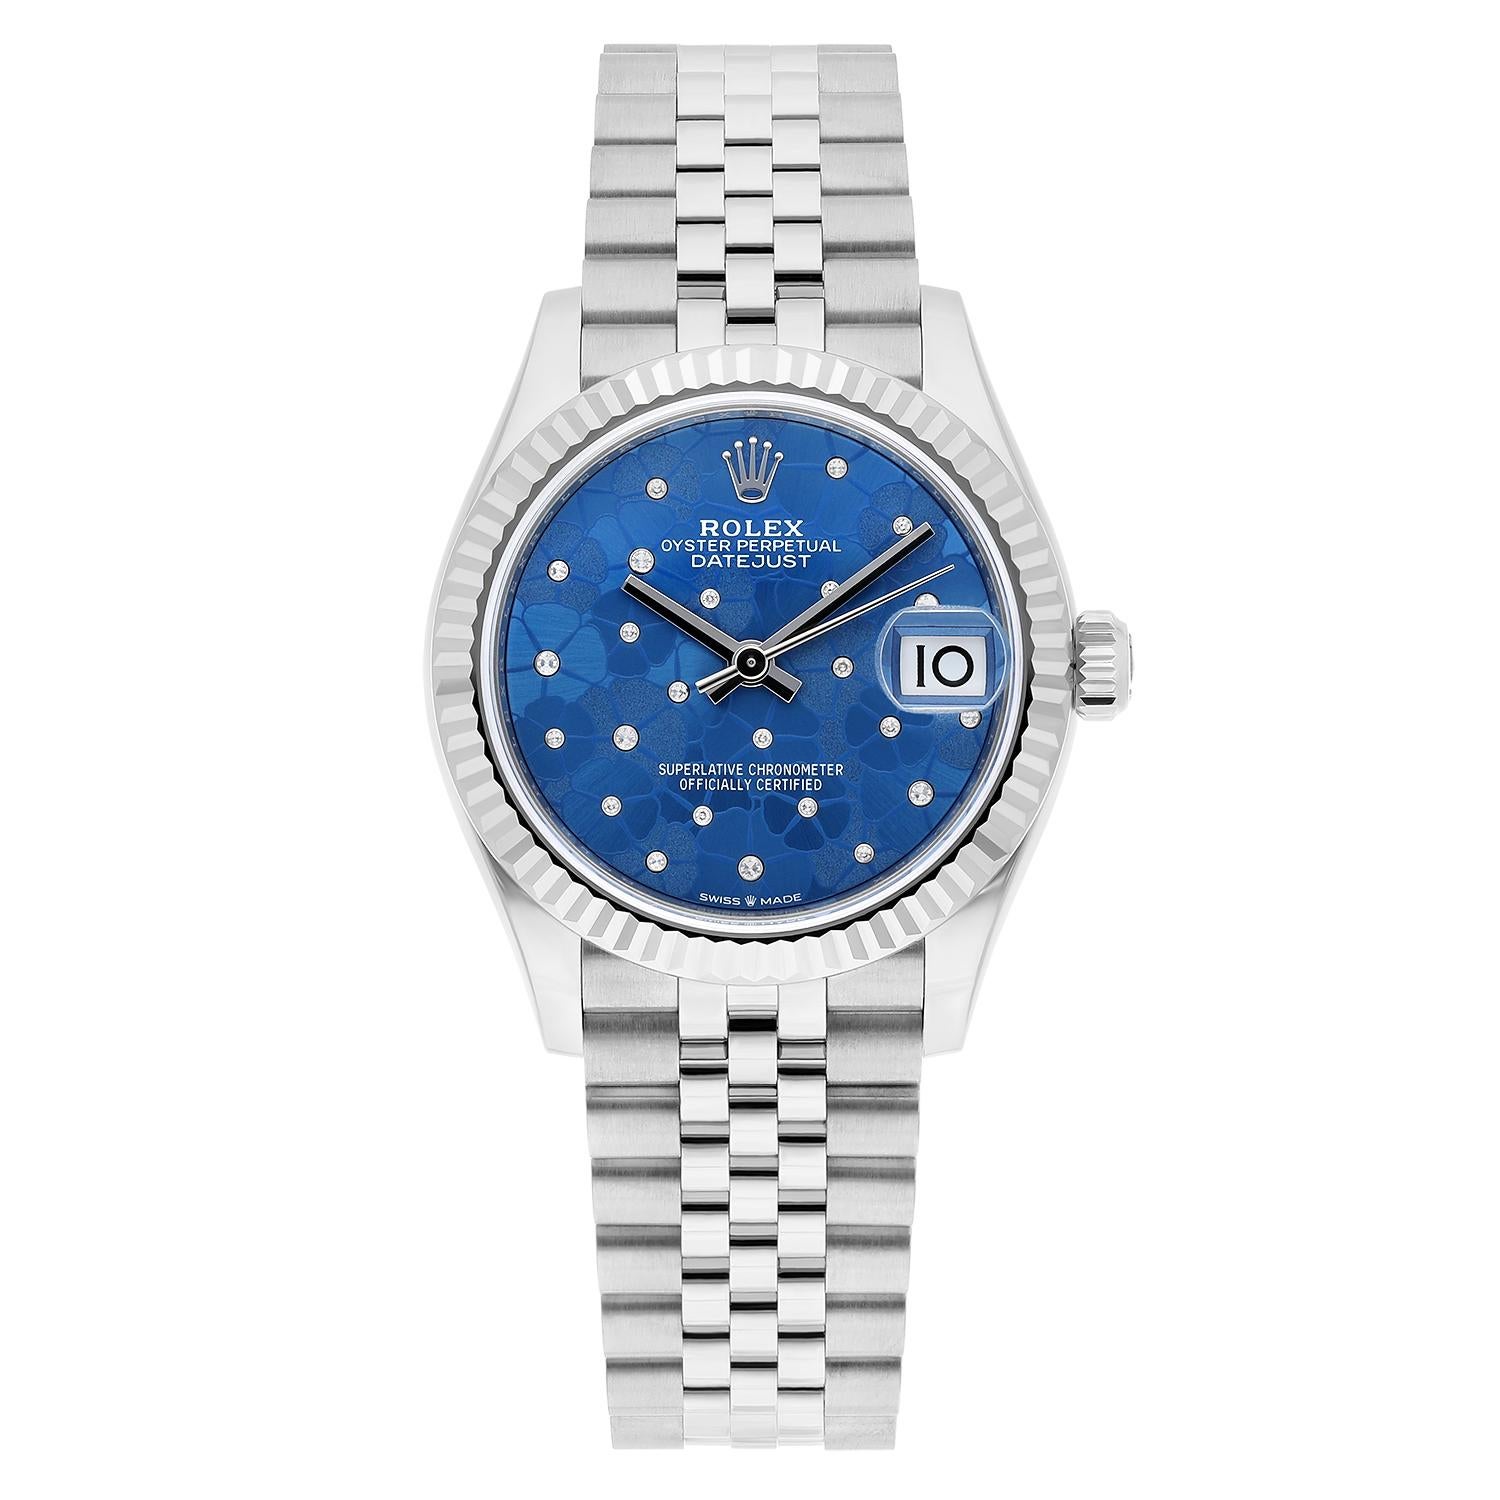 This Rolex Datejust watch for women is a stunning luxury timepiece with a 31mm stainless steel case and a beautiful blue floral-motif diamond dial. It is a versatile watch for both casual and formal occasions. This unworn Rolex Datejust comes with a